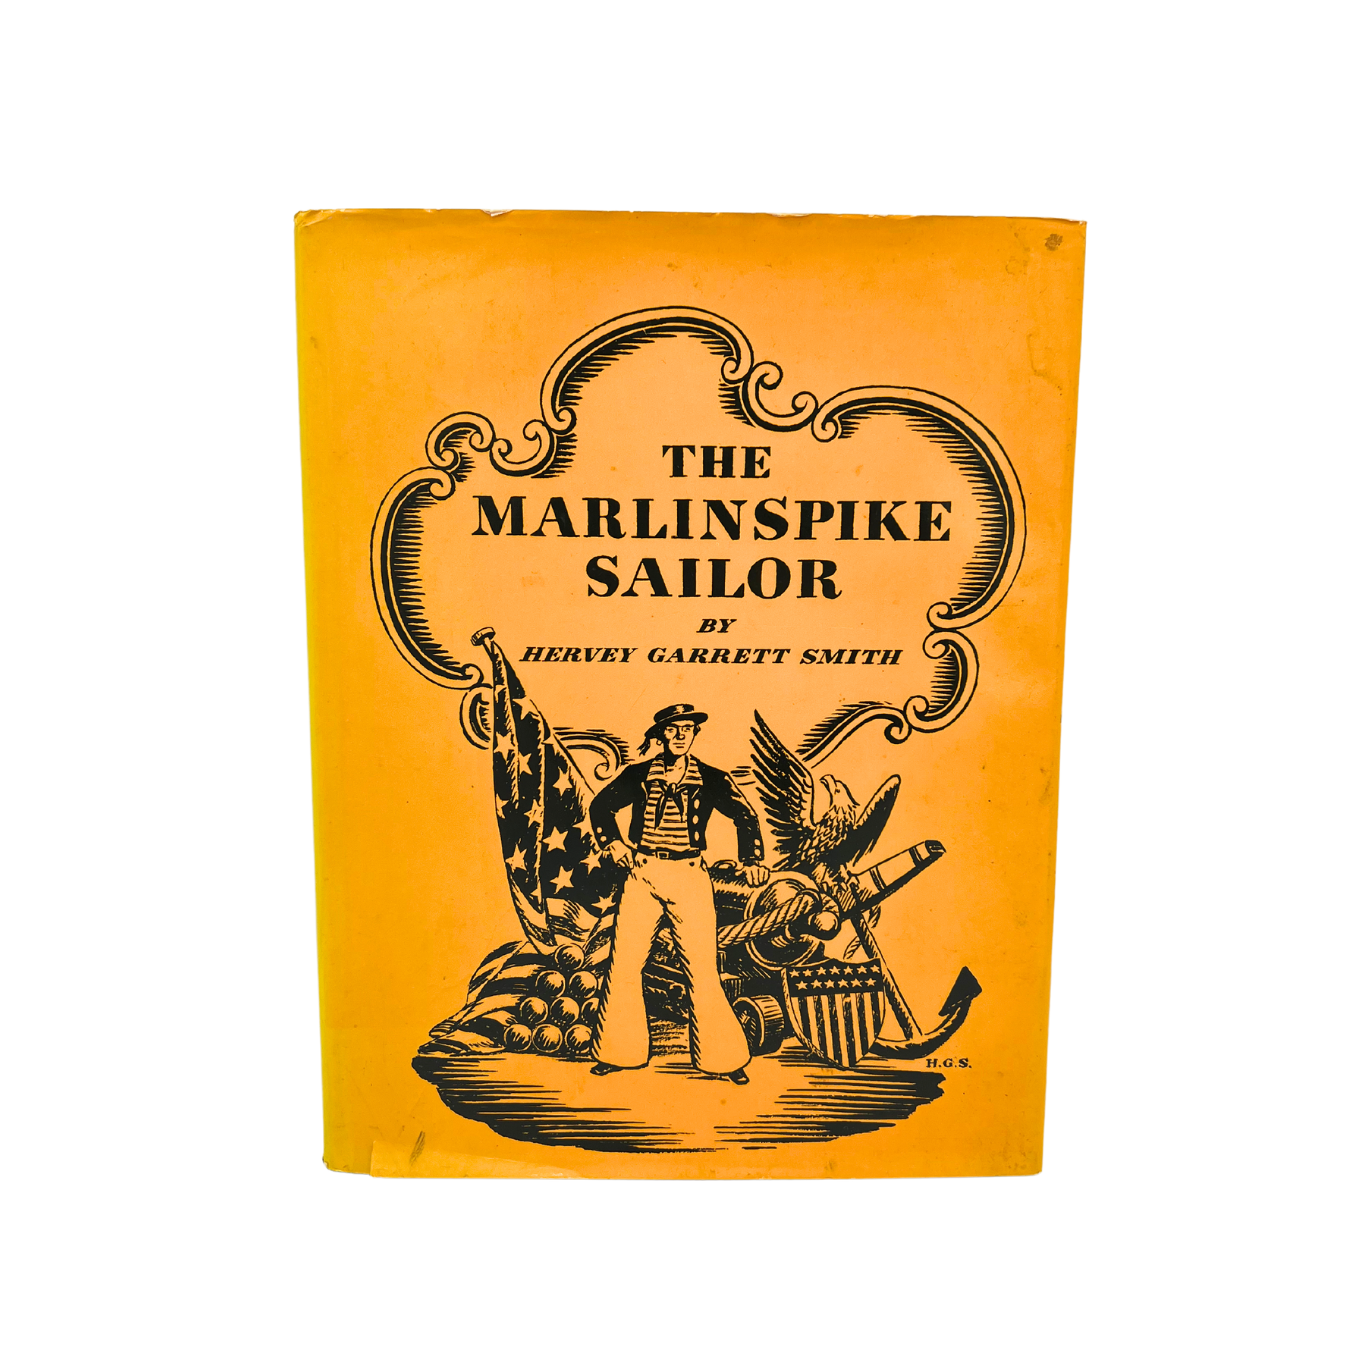 1971 hardcover book: The Marlinspike Sailor